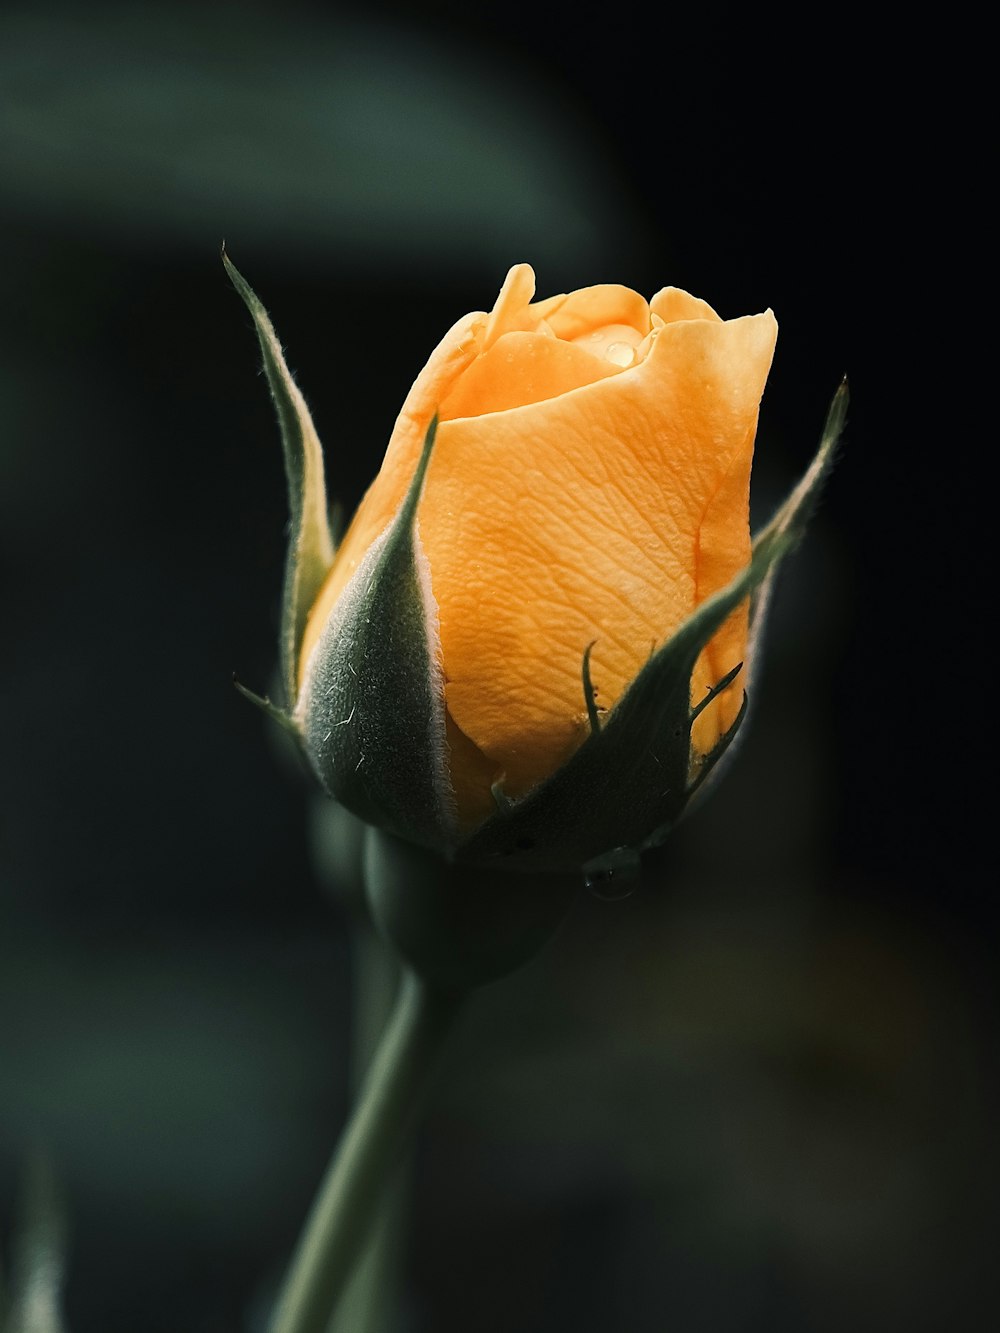 a close up of a single yellow rose